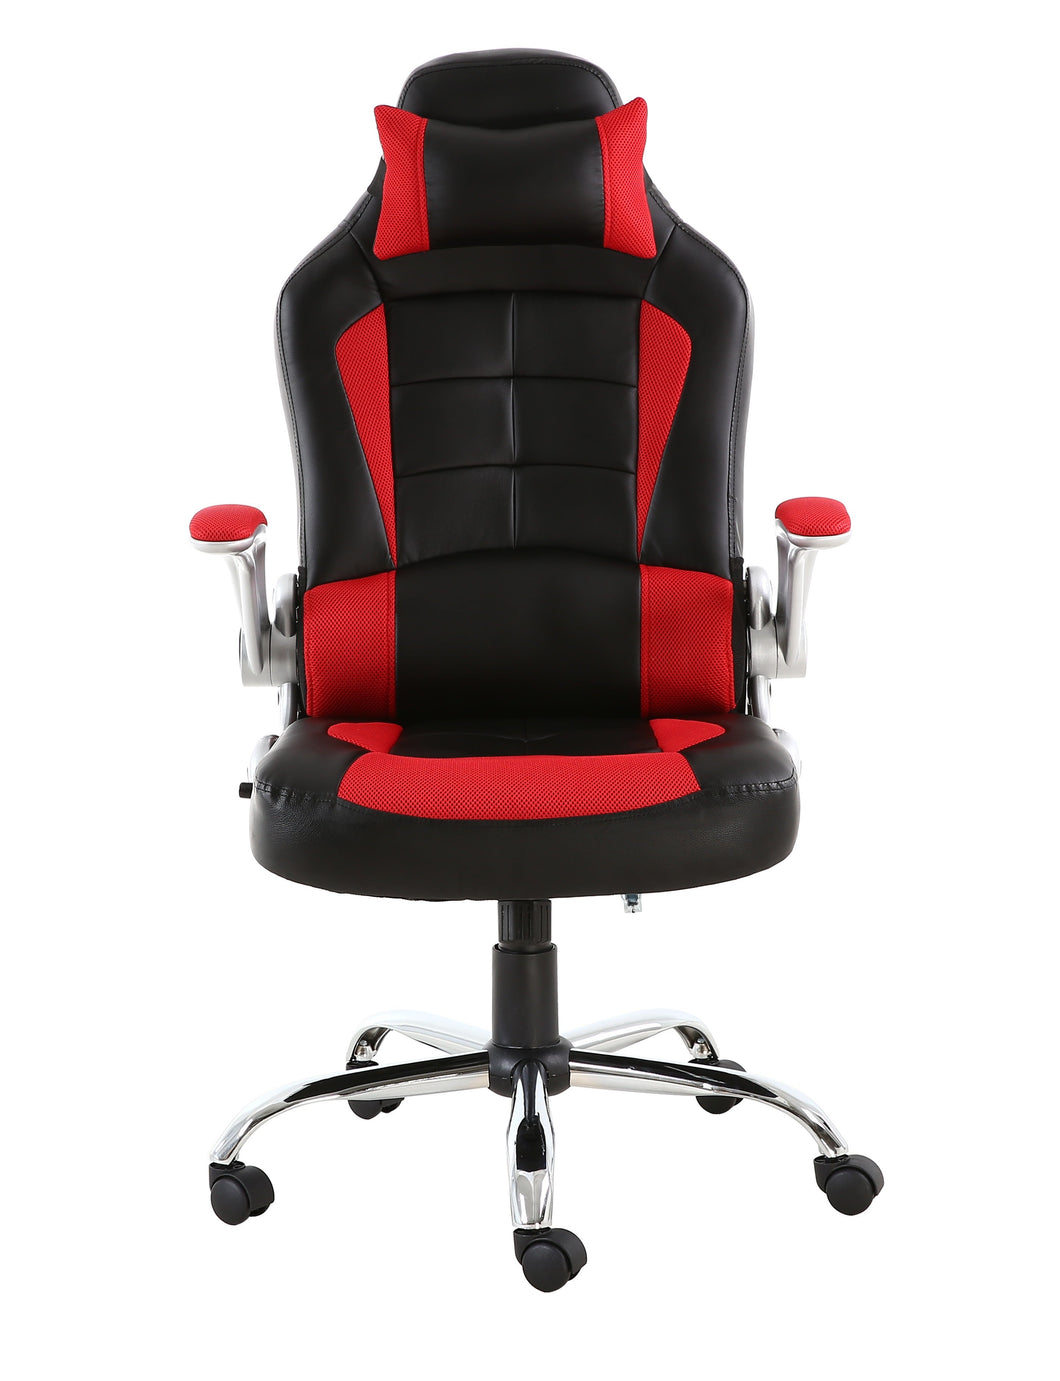 BTExpert High Back Reclining Leather Chair Executive Racing Office Gaming Chair red